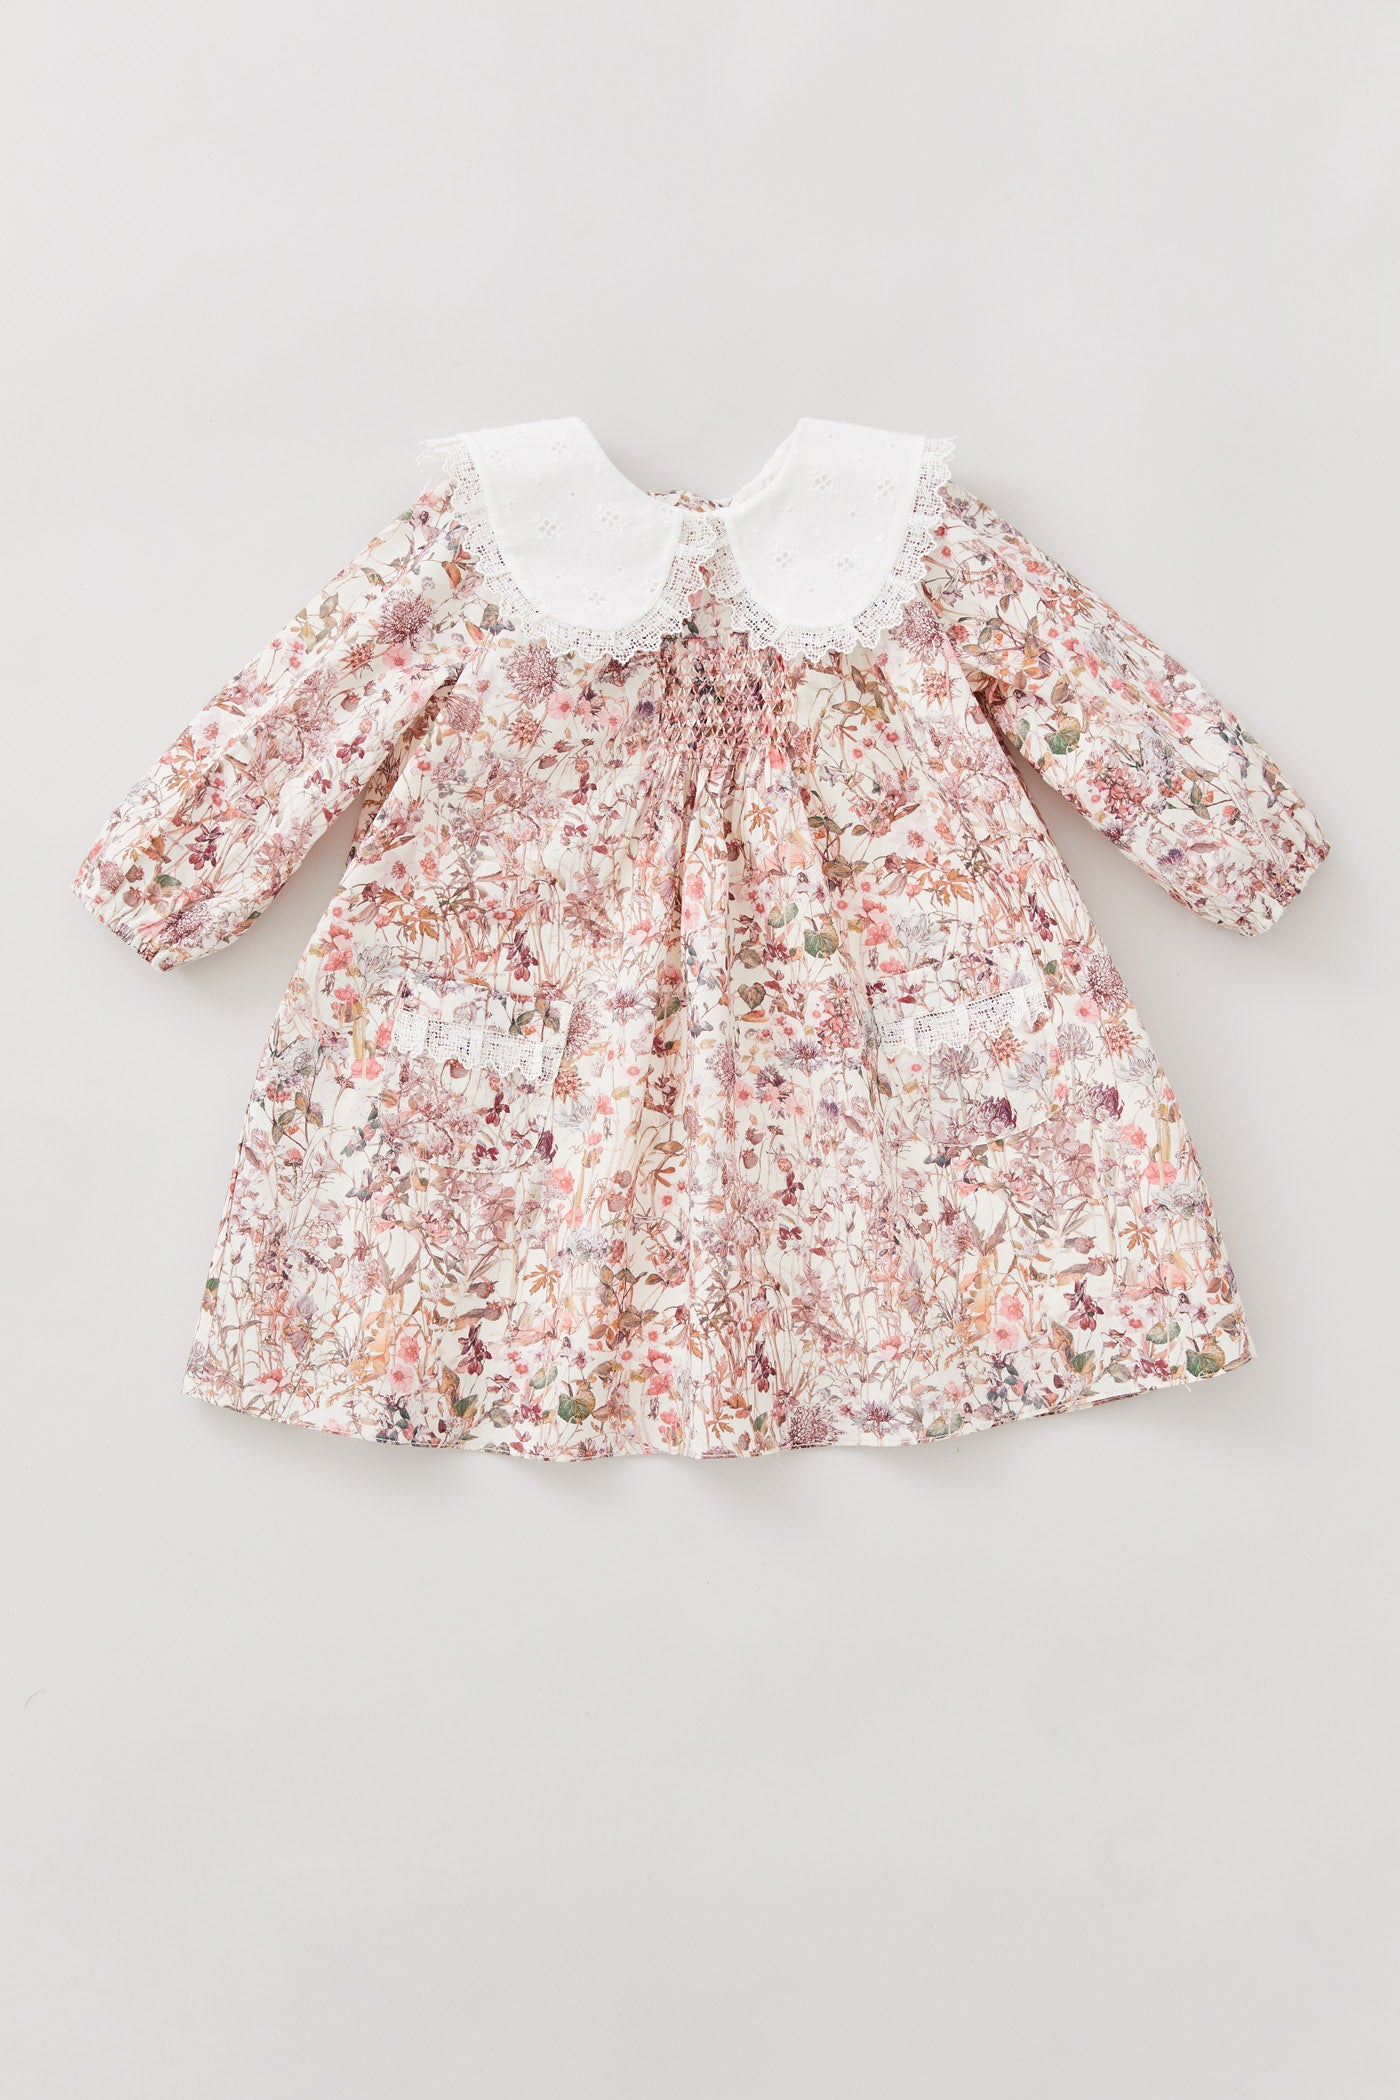 Baby Popcorn Dress Evening Floral Liberty - Designed by Ingrid Lewis - Strawberries & Cream